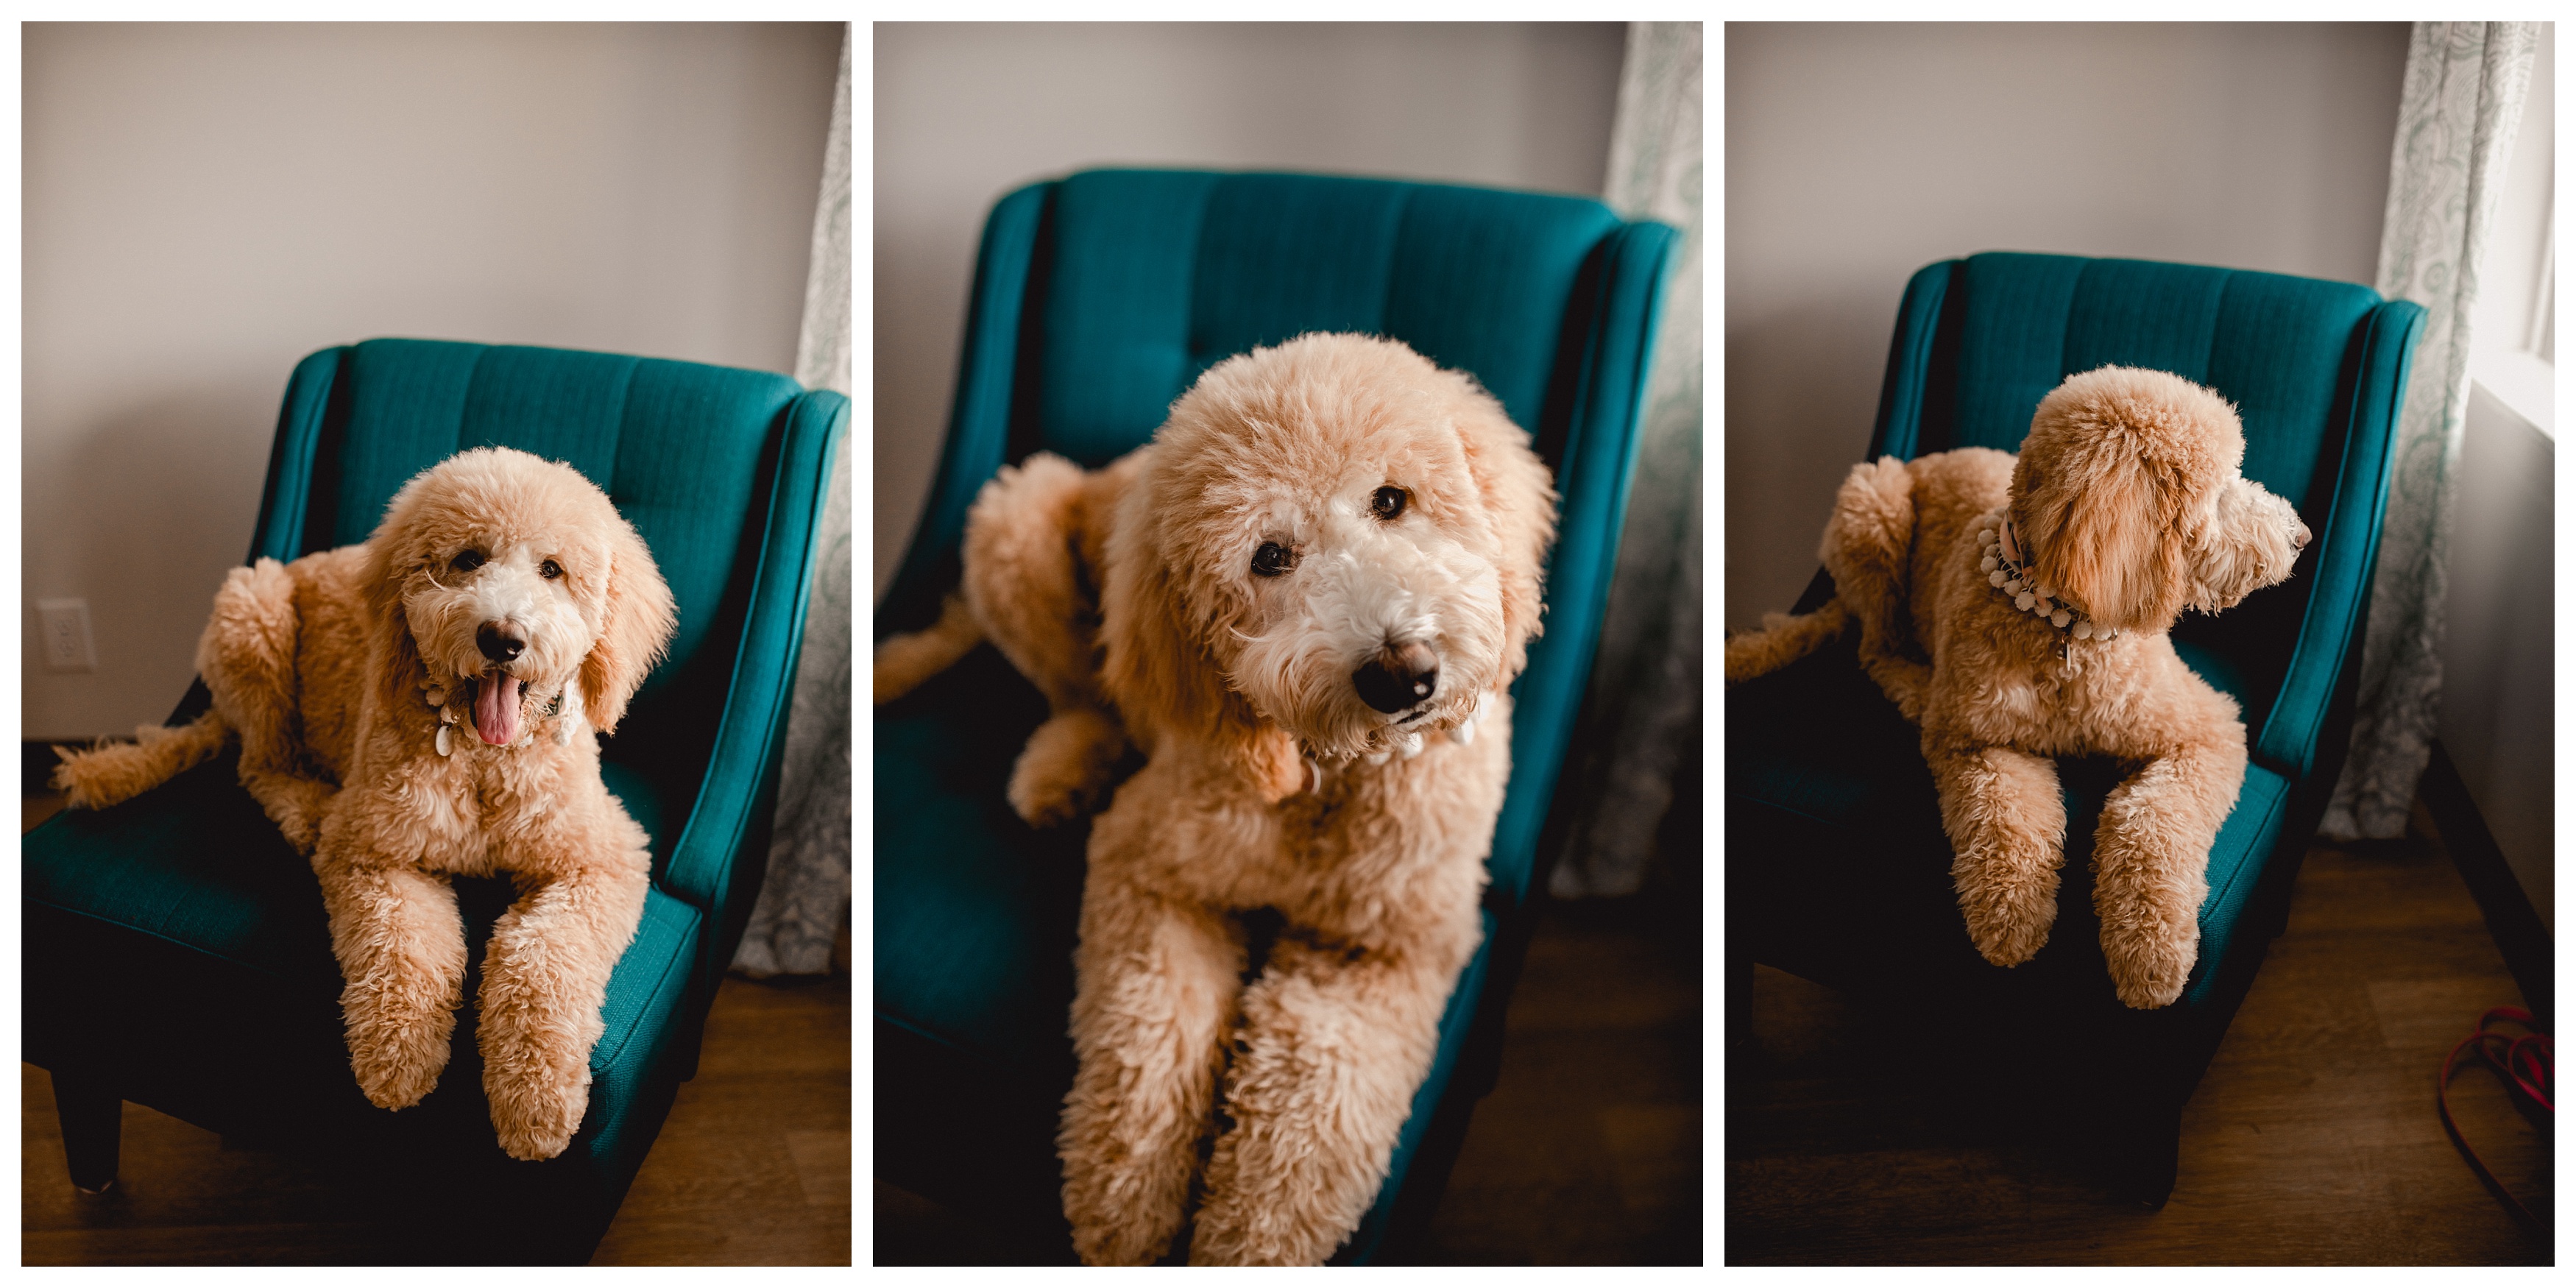 Pet portraits taken by a professional photographer in North Florida. Golden doodle puppy. Shelly Williams Photography